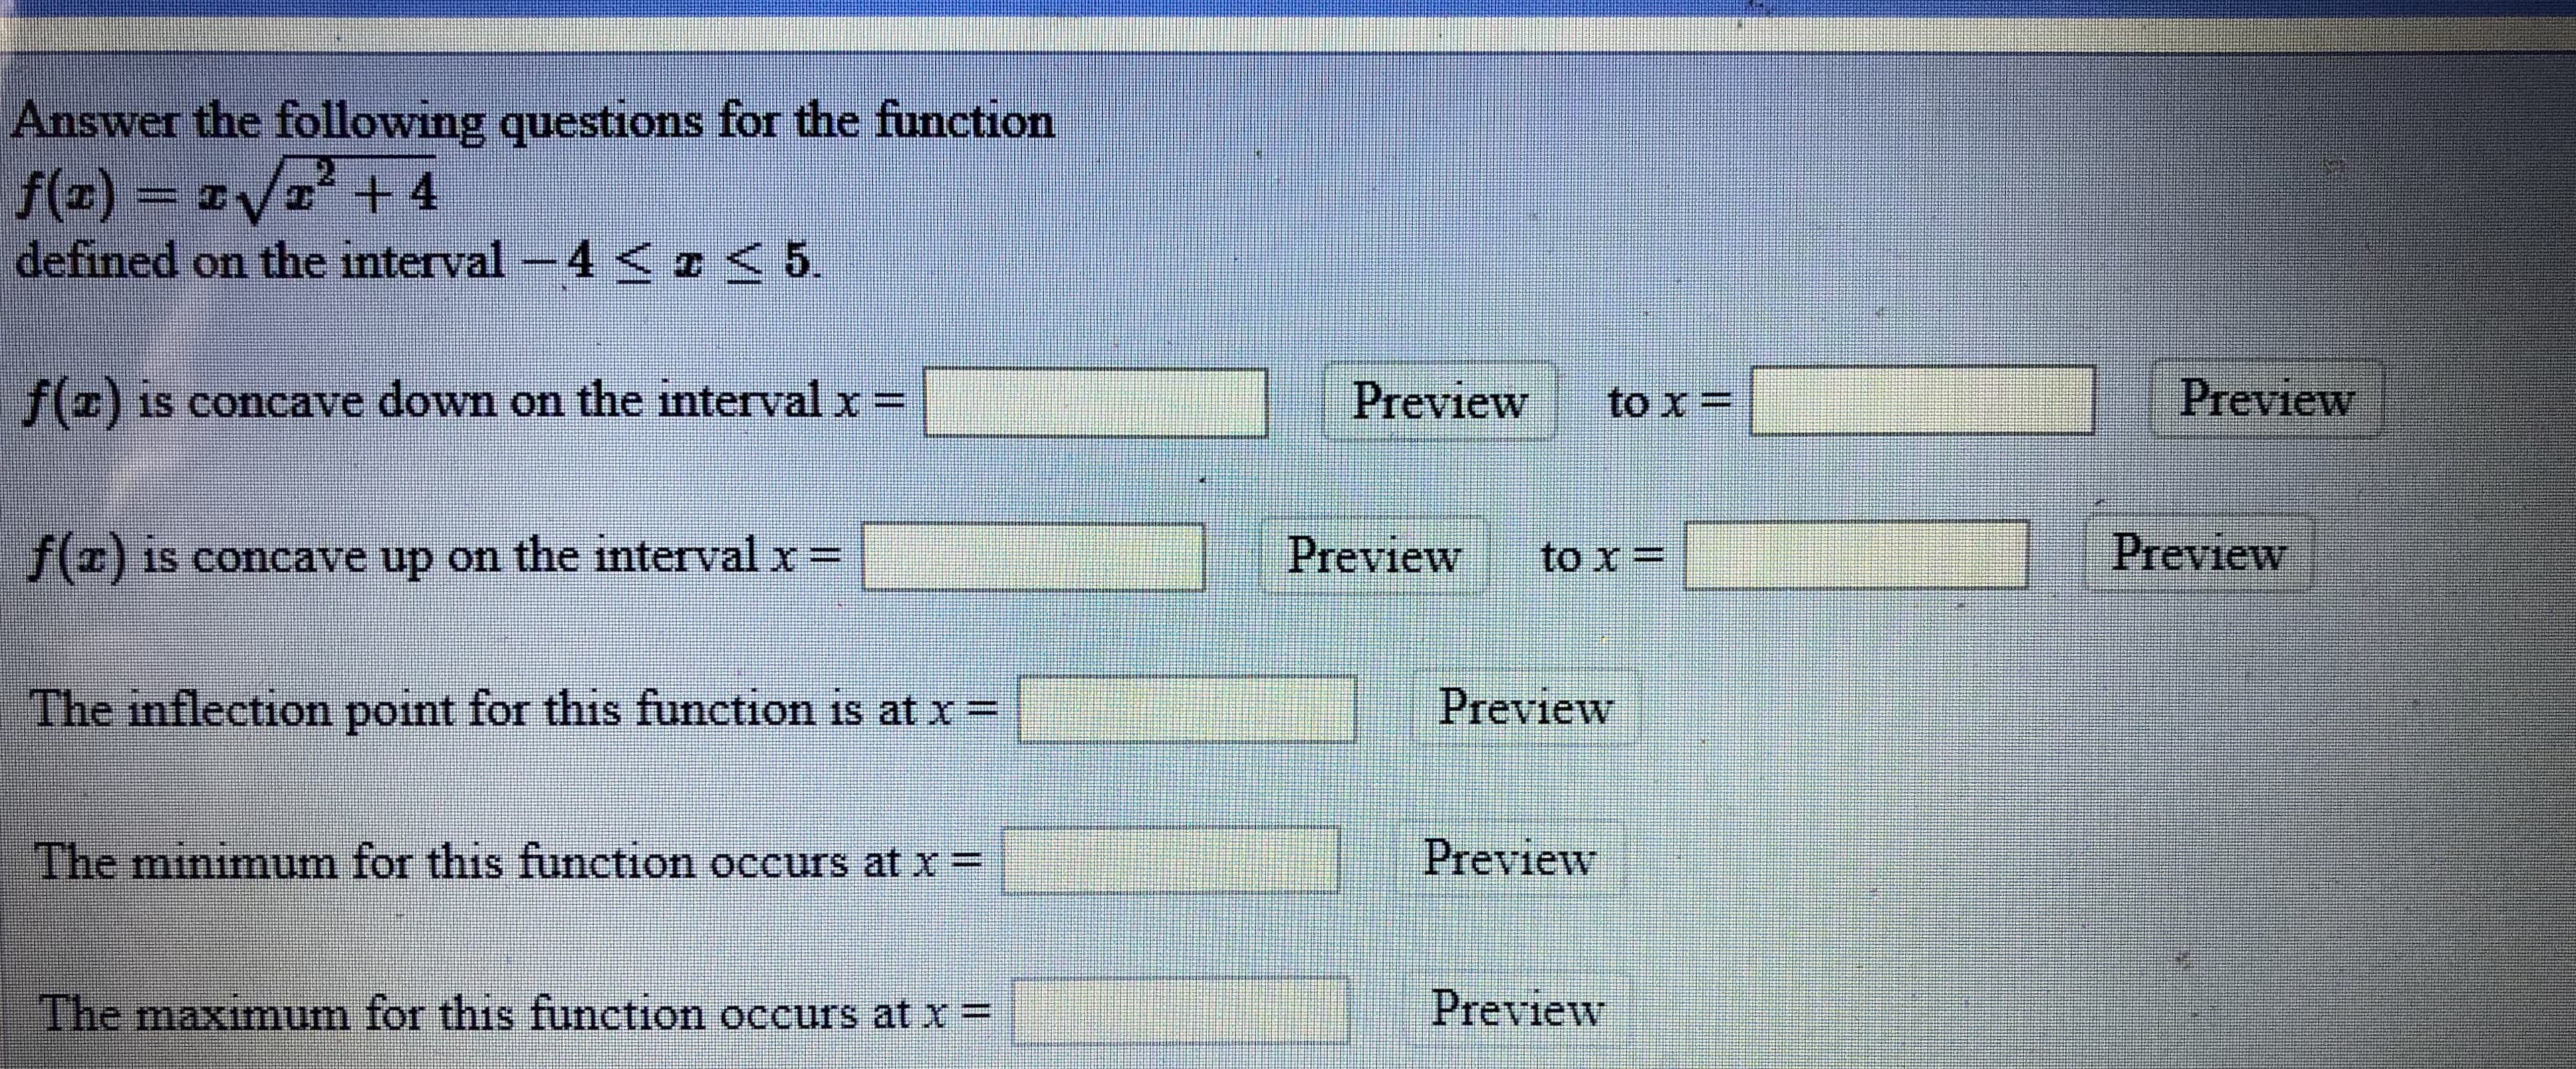 Answer the following questions for the function
f(z) =
defined on the interval -4 ¤<5.
21
/ + 4
f() is concave down on the interval x=
Preview
to x =
Preview
f) is concave up on the interval x =
Preview
to x =
Preview
The inflection point for this function is at x=
Preview
The minimum for this function occurs at x =
Preview
IThe maximum for this function occurs at x=
Preview
